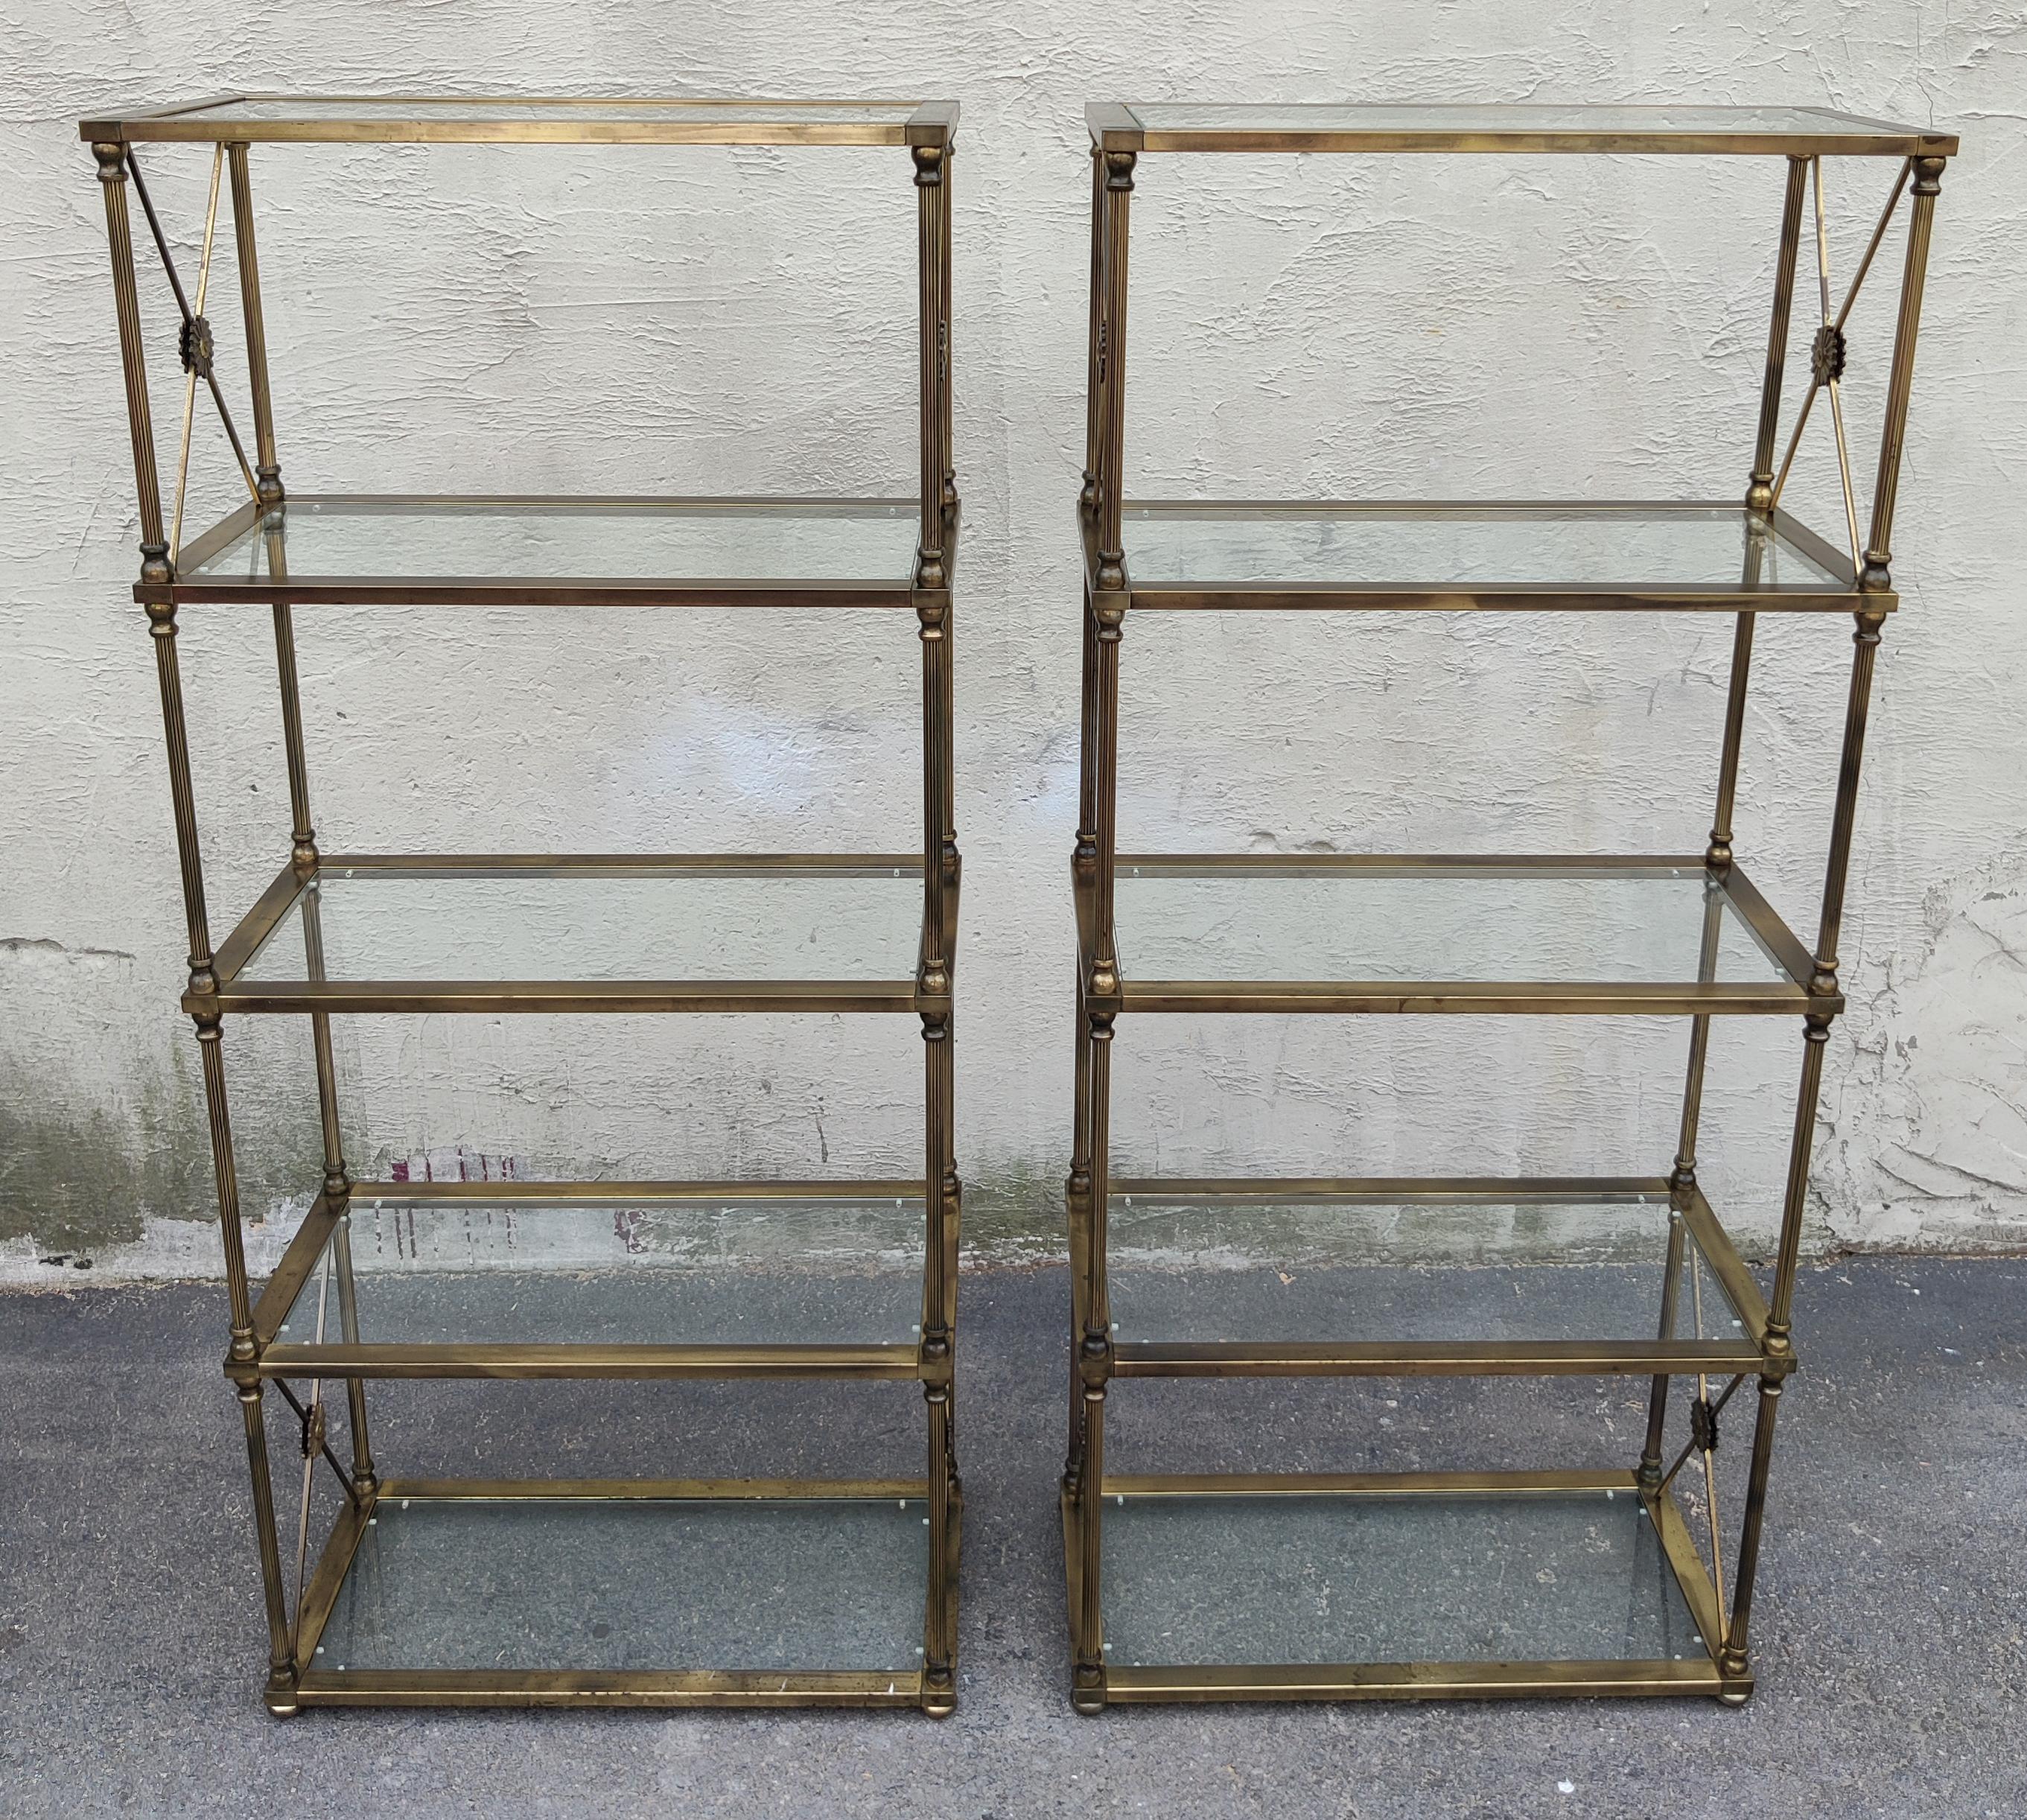 This pair of brass and glass etegeres were made in the style of distinguished manufacturer Mastercraft, and feature high quality construction and classical design touches. These include fluted brass supports in each corner and ornate solid brass